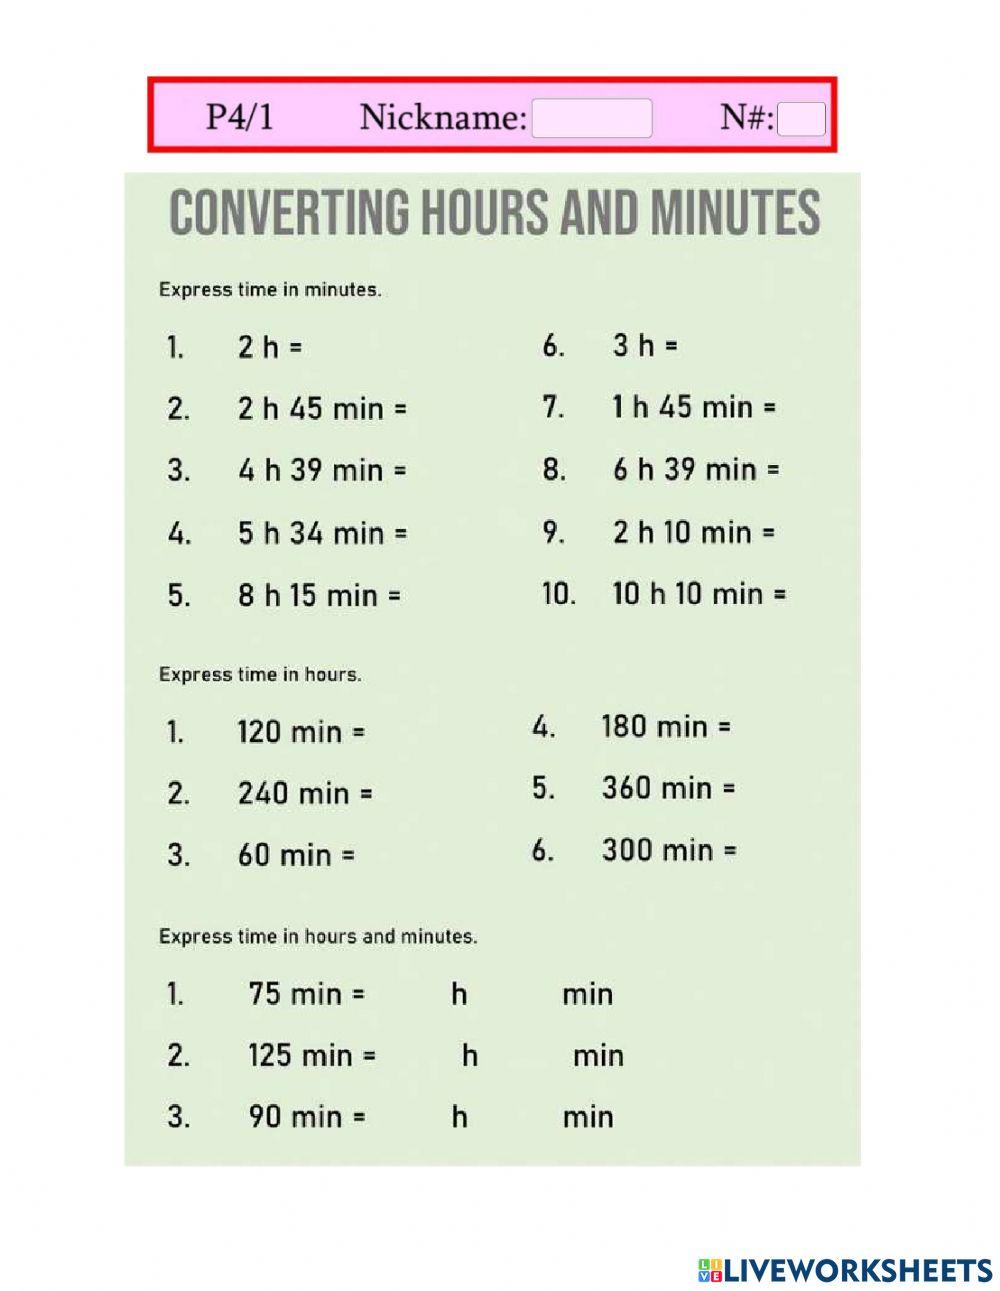 Convert hours and minutes